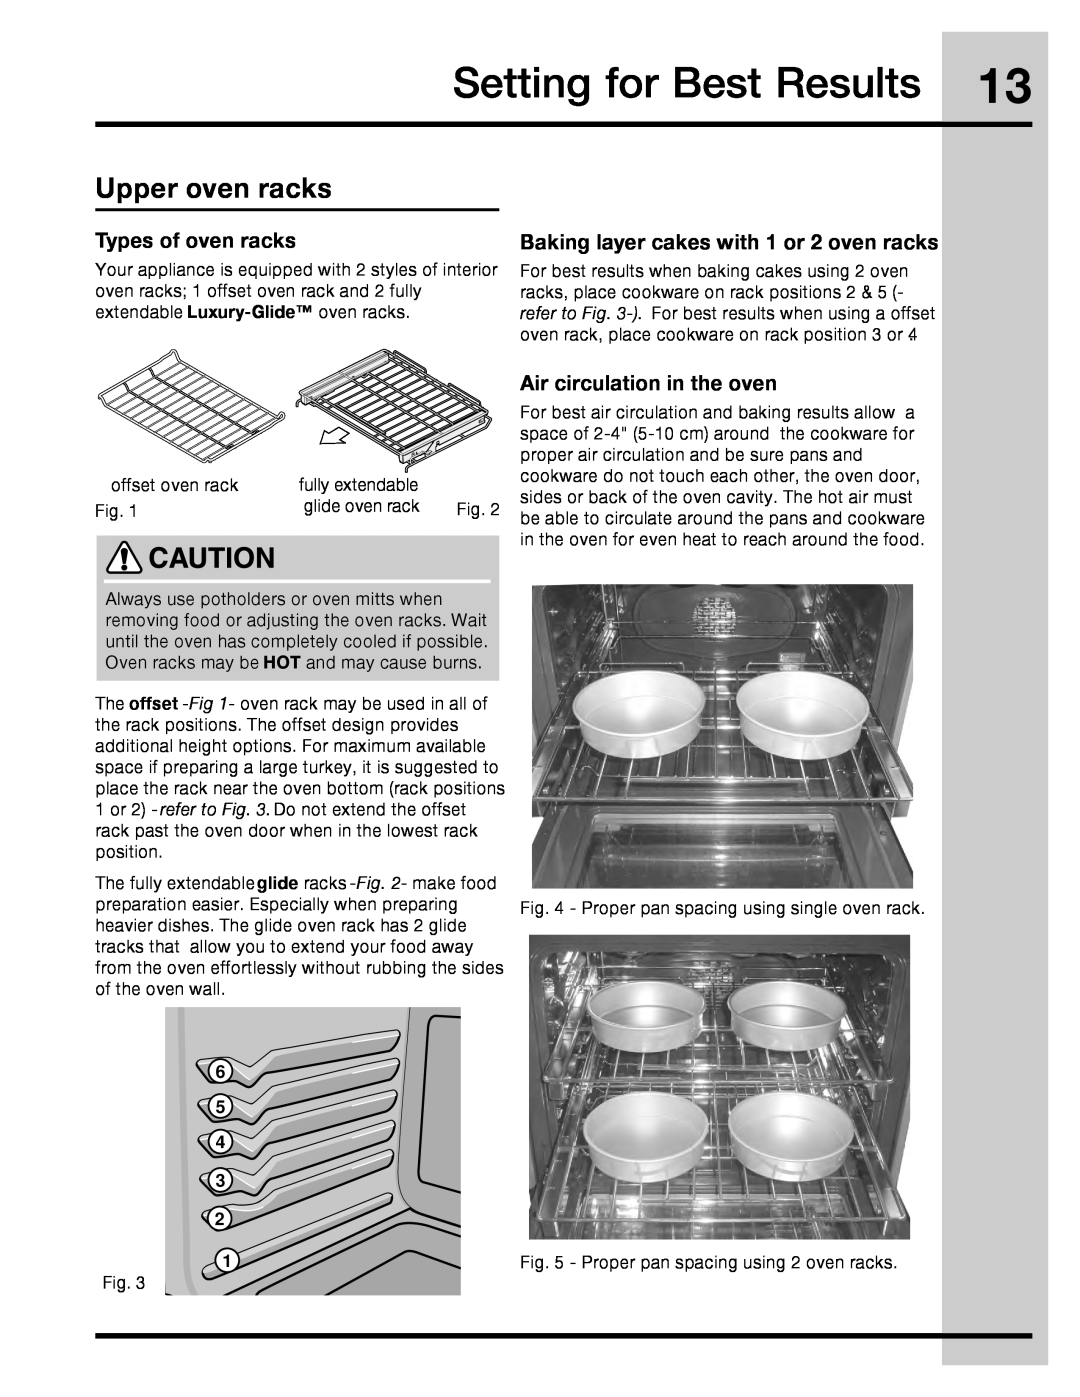 Electrolux 316471110 manual Setting for Best Results, Upper oven racks, Types of oven racks, Air circulation in the oven 